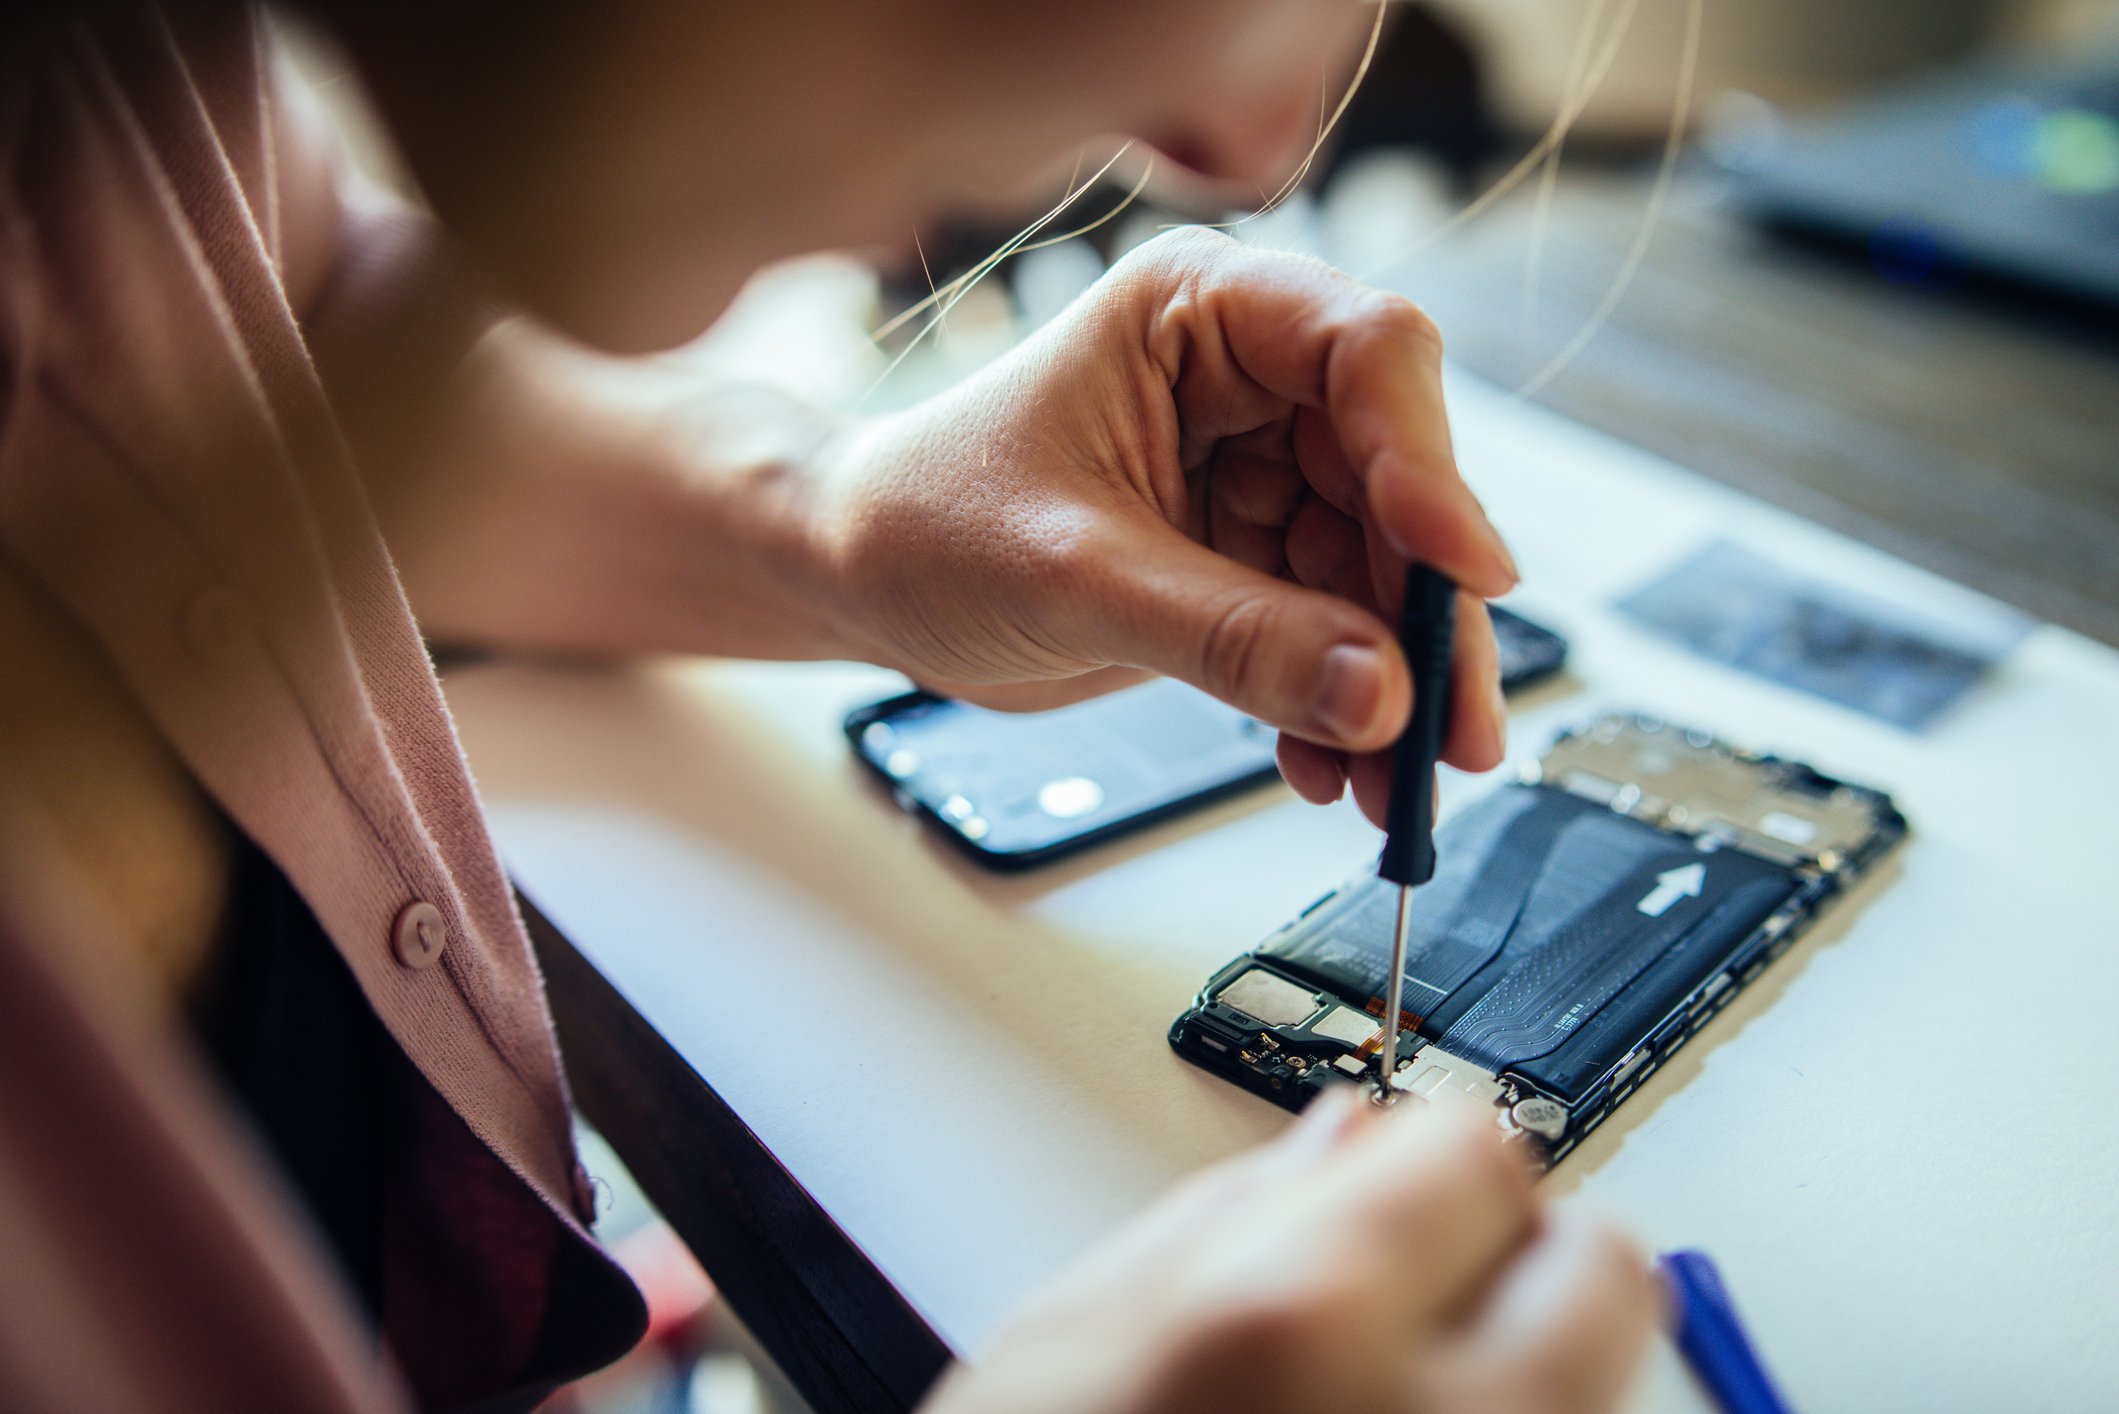 5 tech companies that make it (sort of) easy to repair your own devices